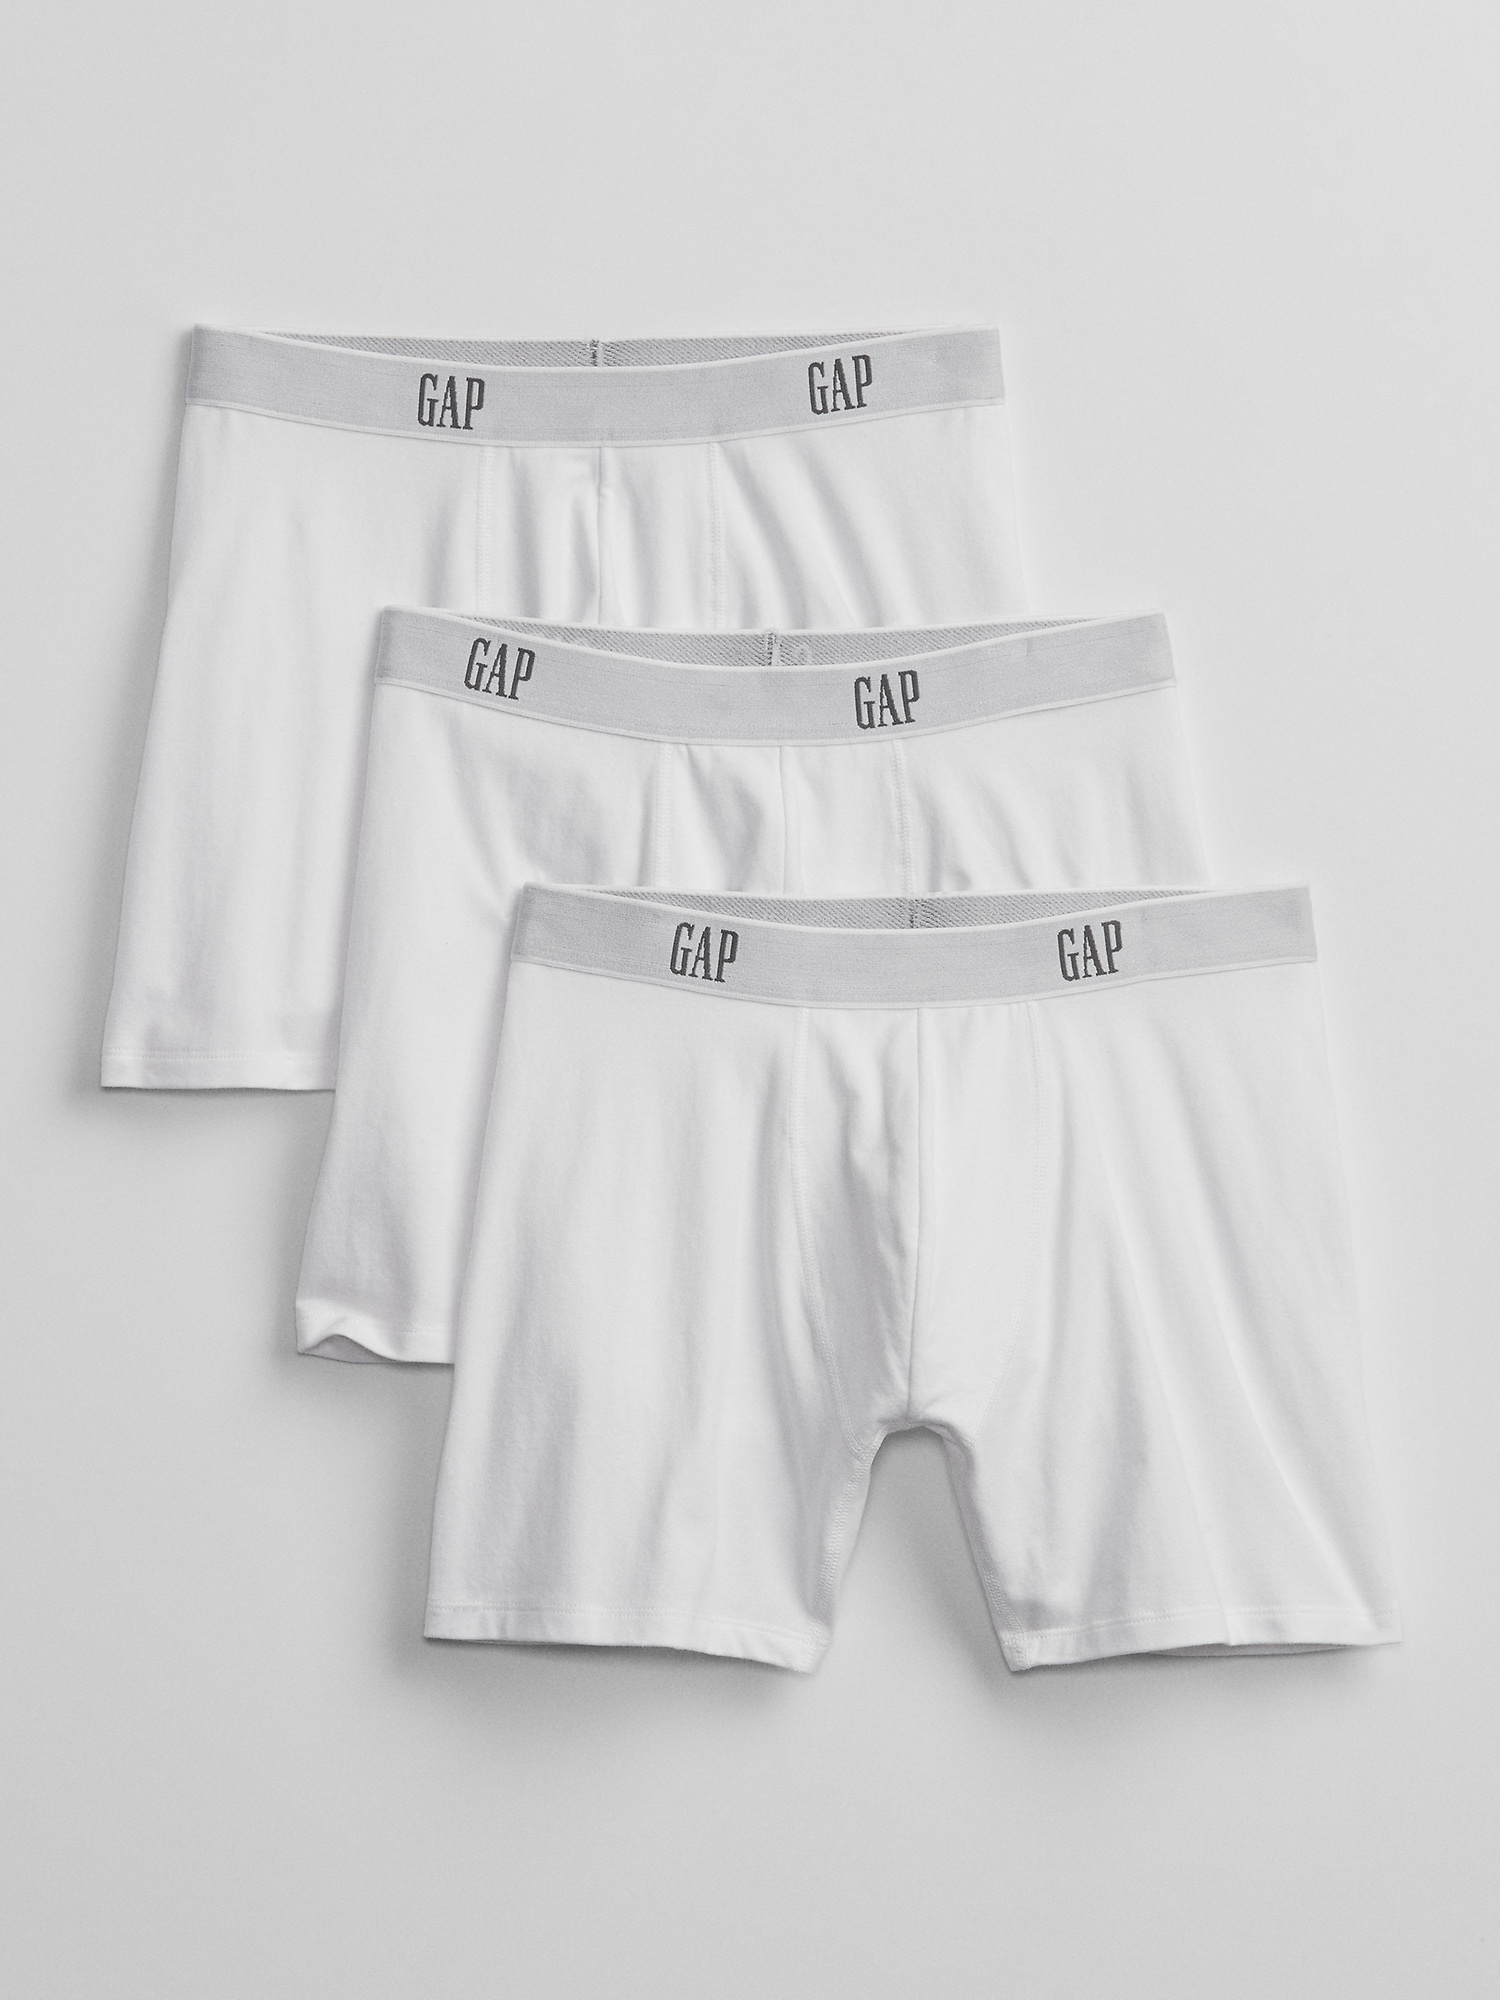 Gap mens underwear available store articles price 250 rs each. Contact on  8130841822 whatsapp for order.